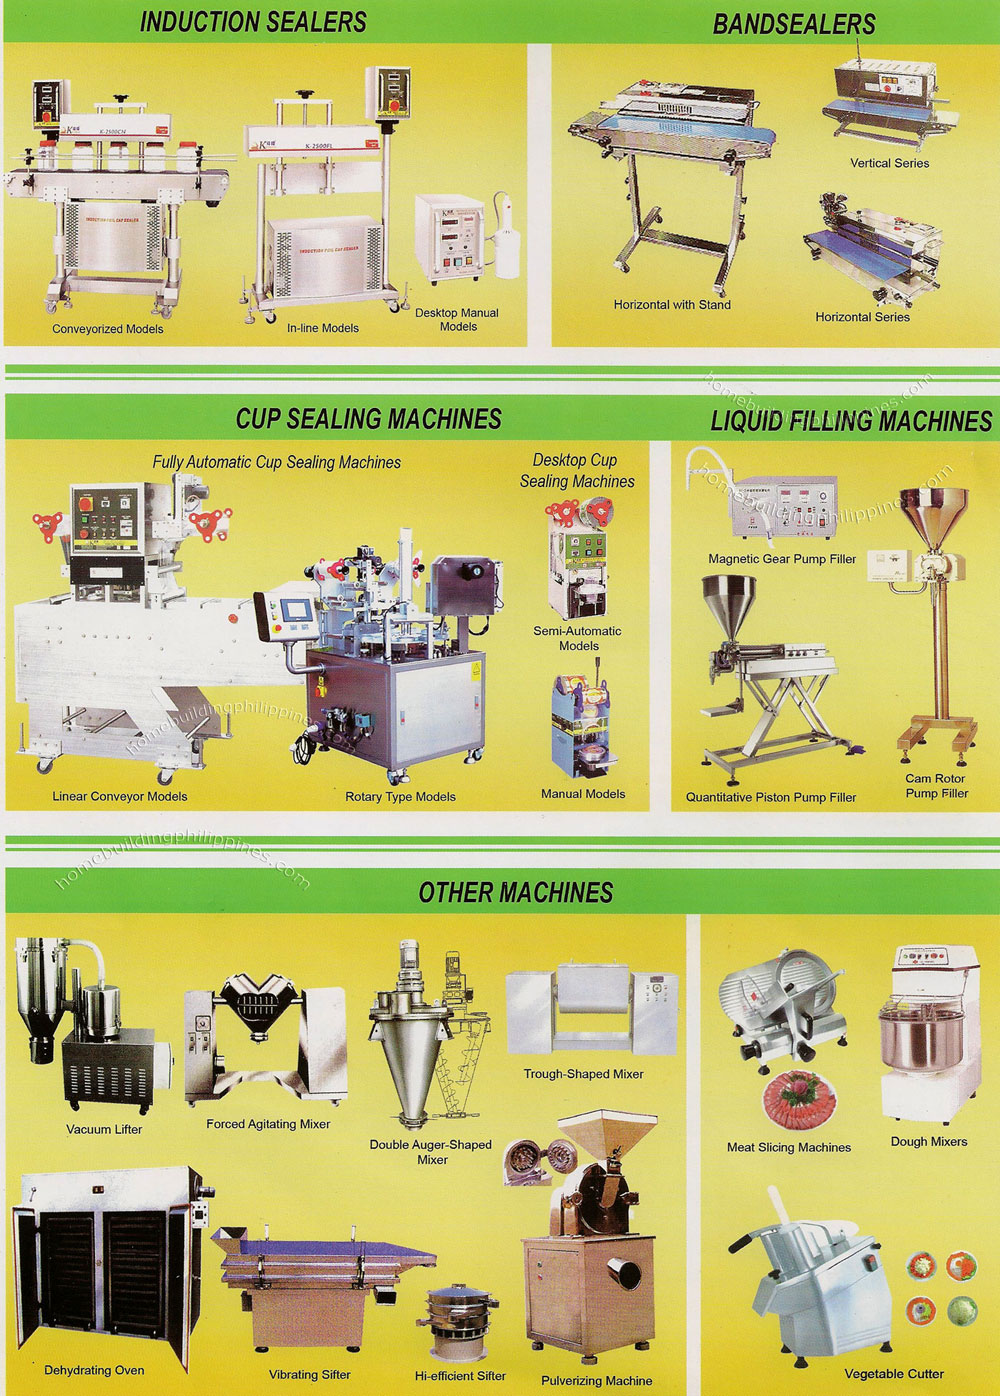 Induction Sealer; Band Sealers; Cup Sealing; Liquid Filling Machines